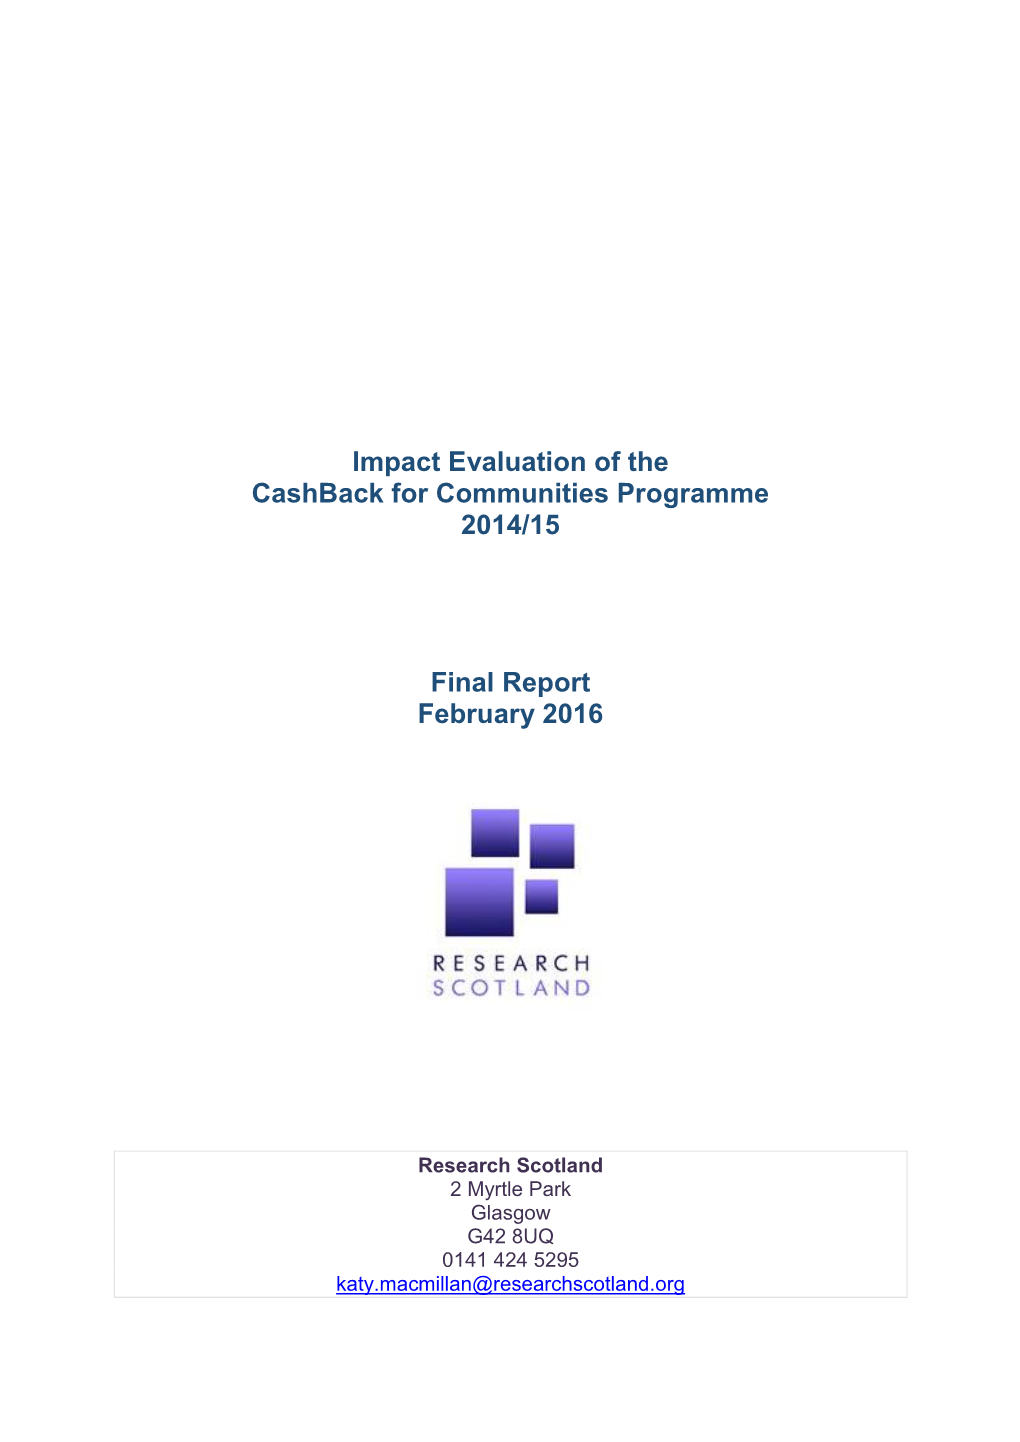 Impact Evaluation of the Cashback for Communities Programme 2014/15 Final Report February 2016